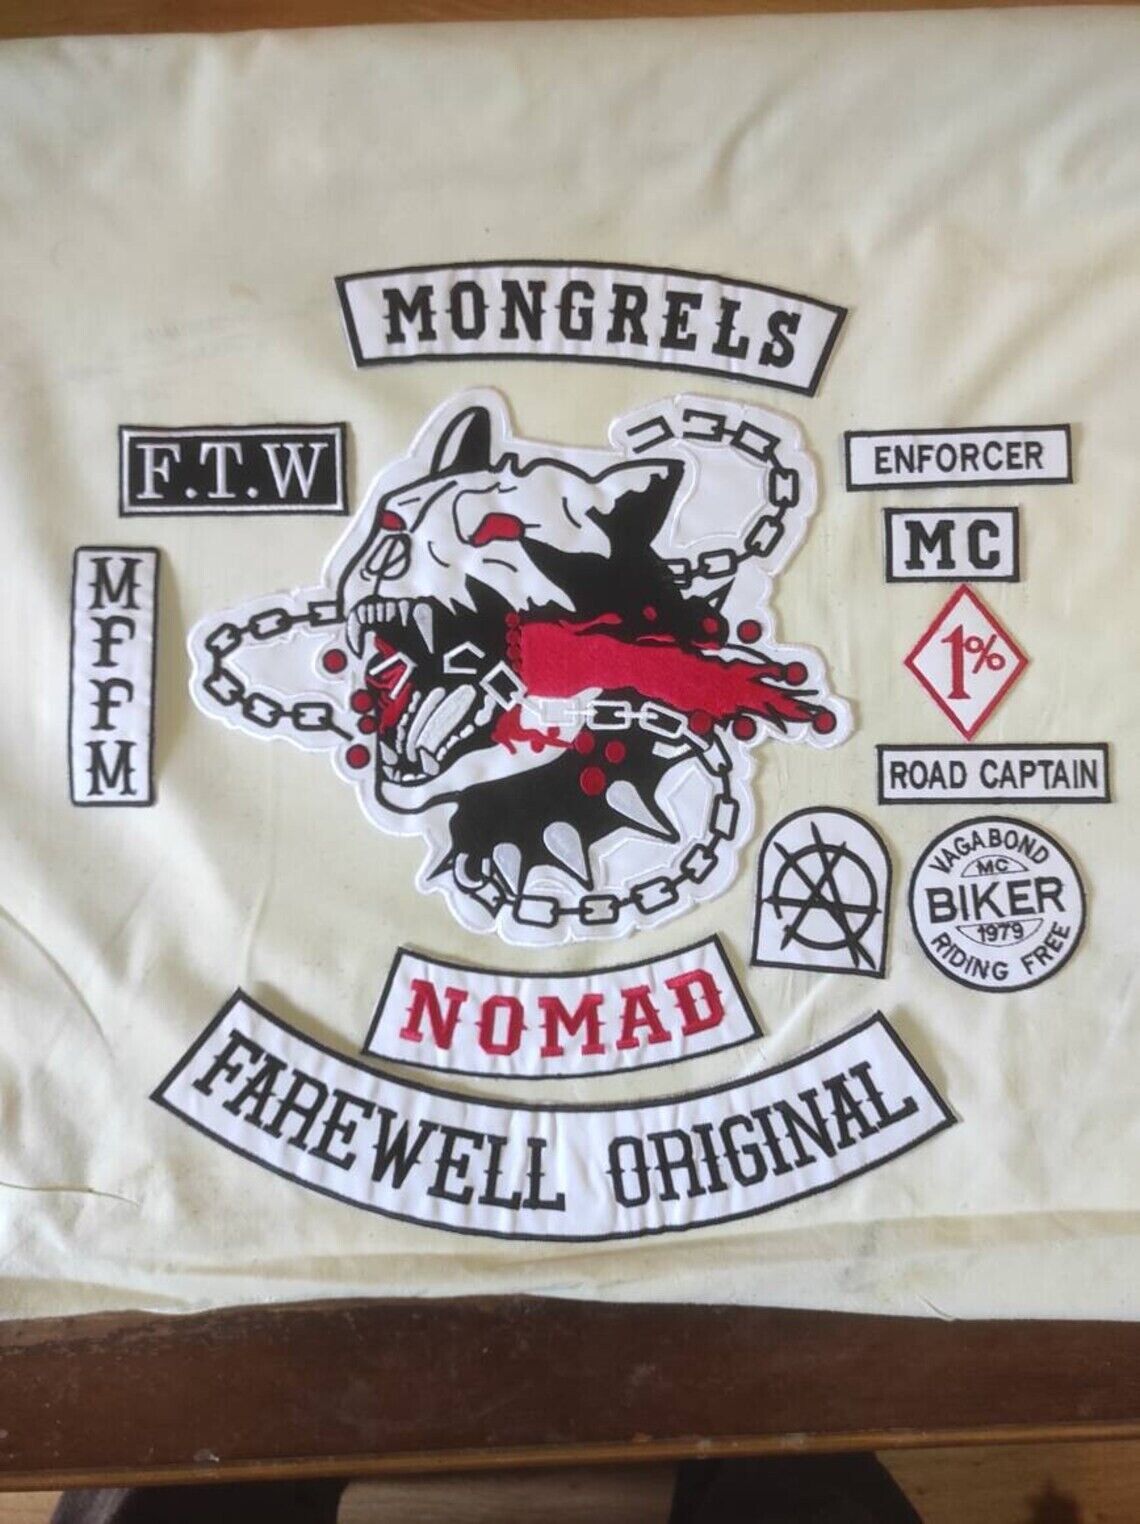 LARGE backing mongrels dogs FAREWELL ORIGINAL Embroidered biker Patches